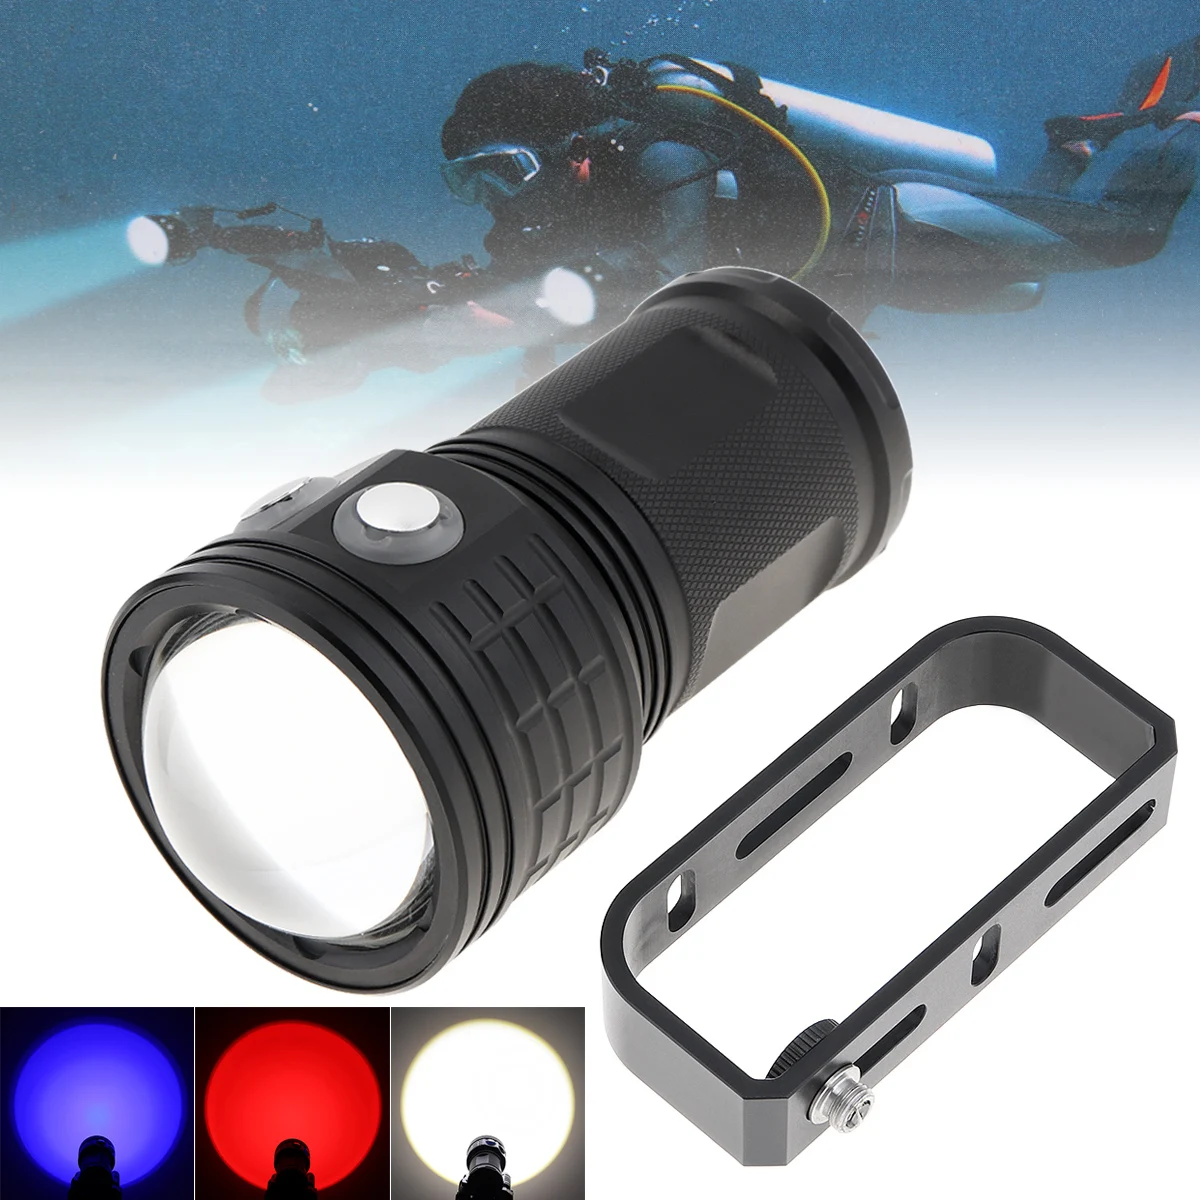 50W Professional Lens Photography Fill Lights White Red Blue Light Diving Flashlight Underwater 80M Waterproof IPX8 Lamp Torch